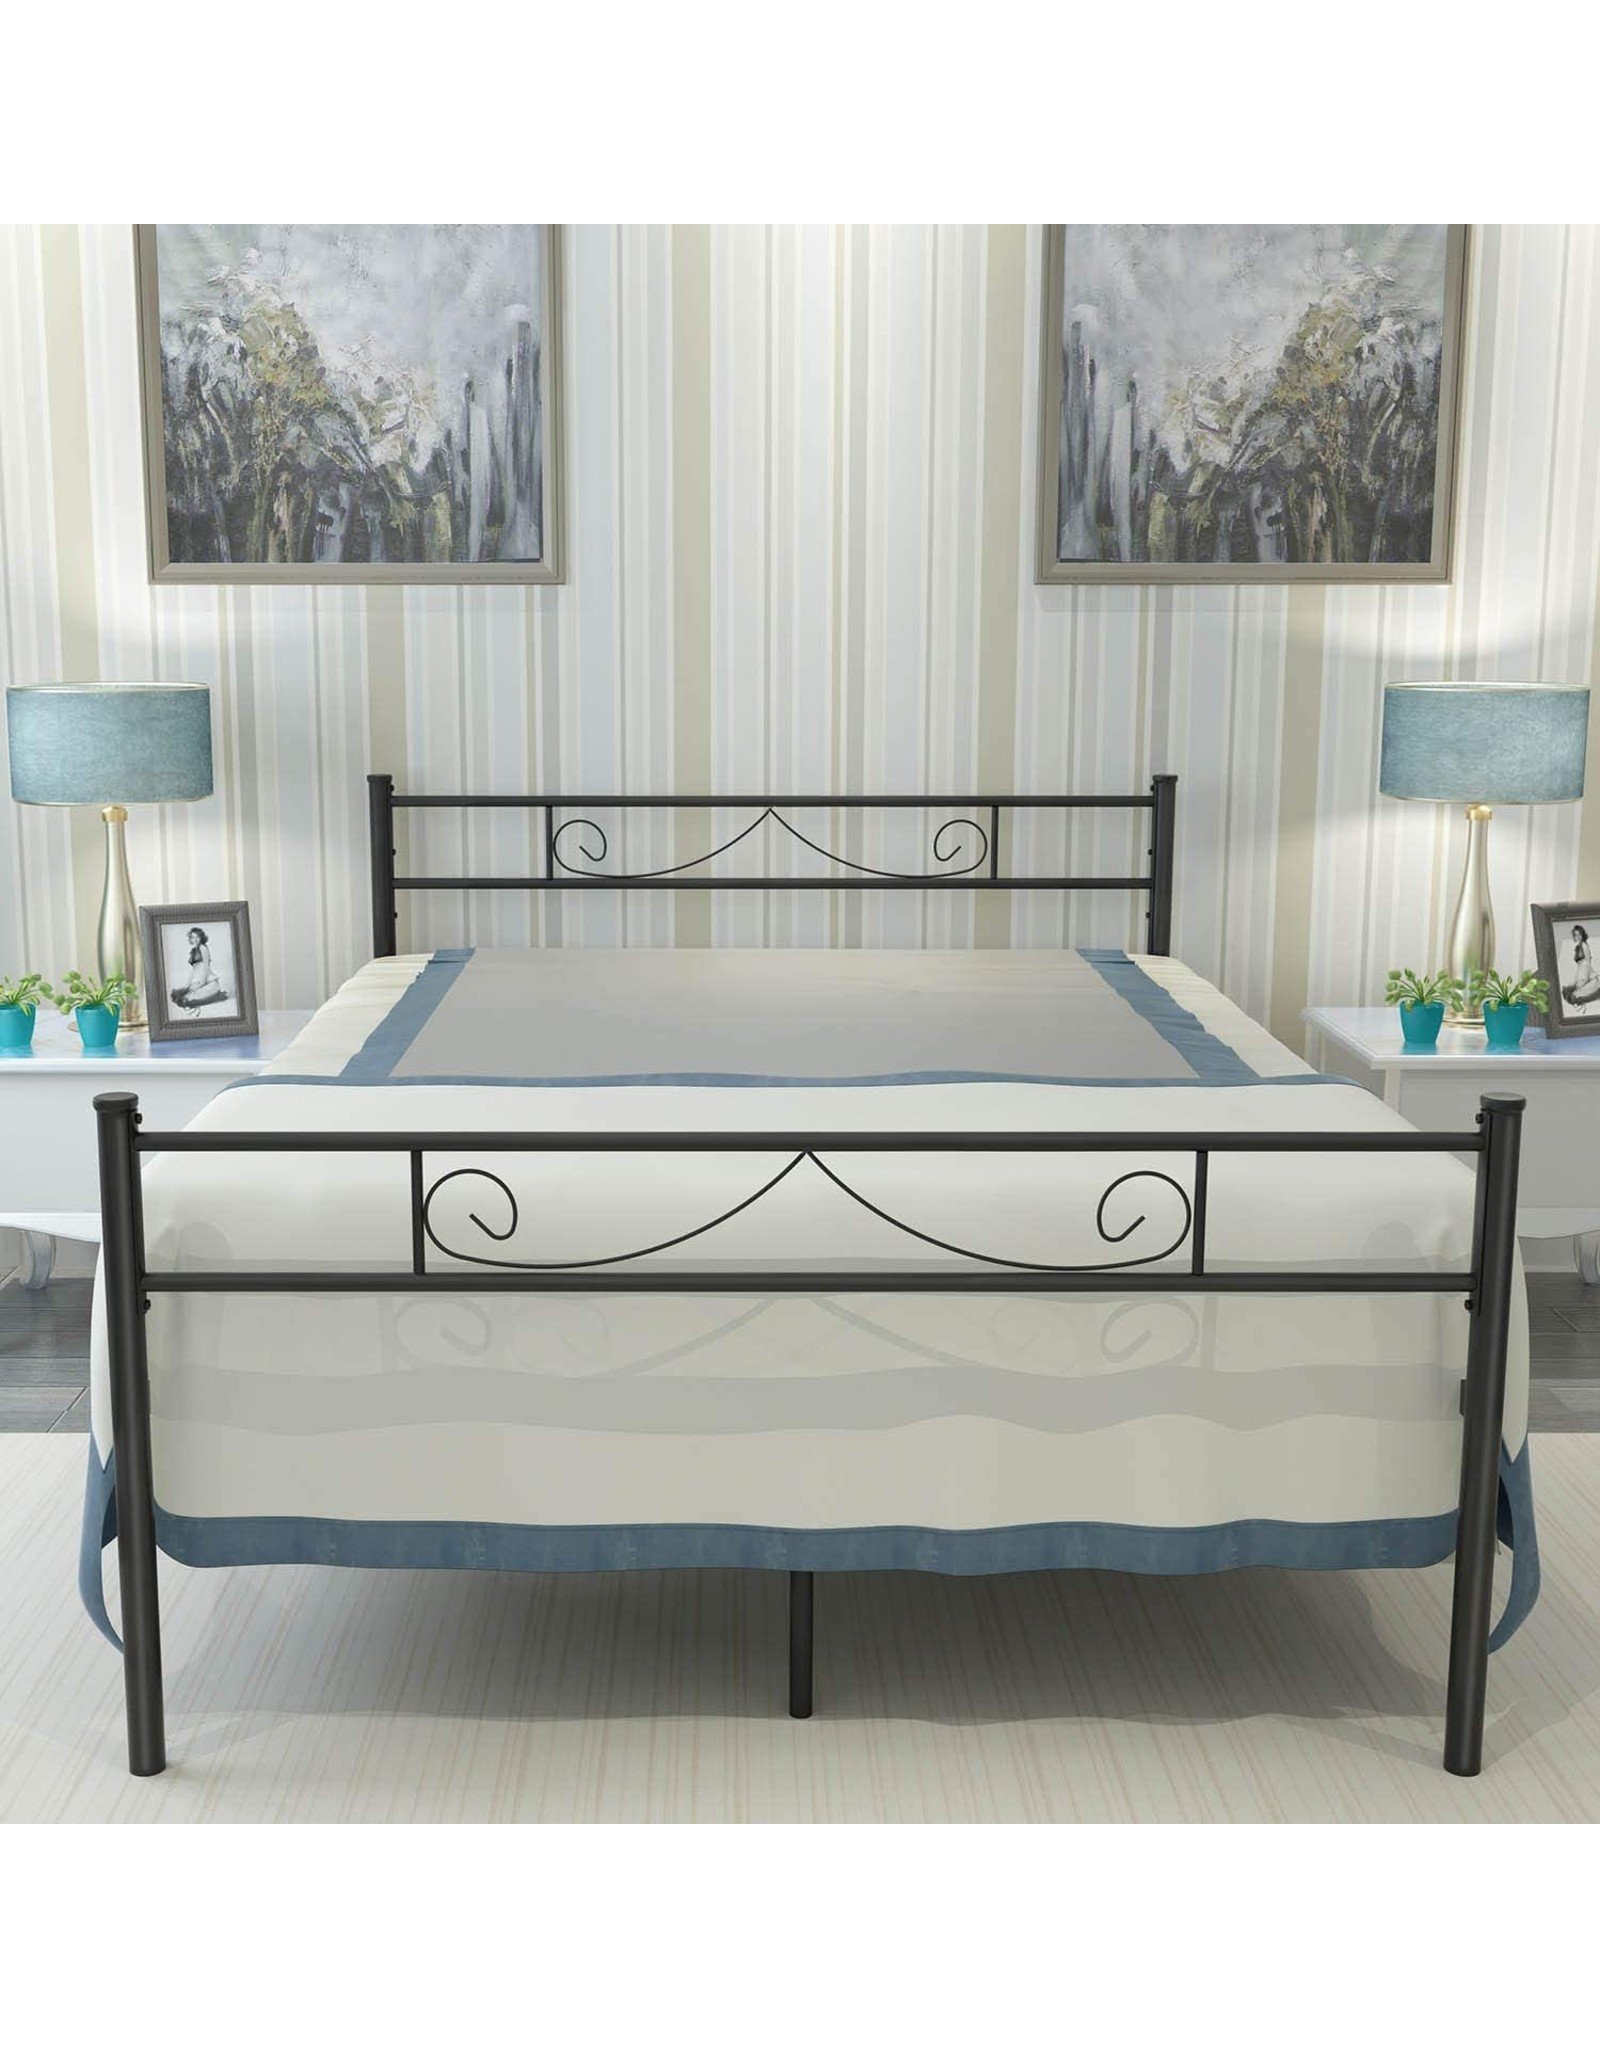 Haageep 18 Inch Queen Bed Frame, Queen Size Bed Frame No Box Spring Needed